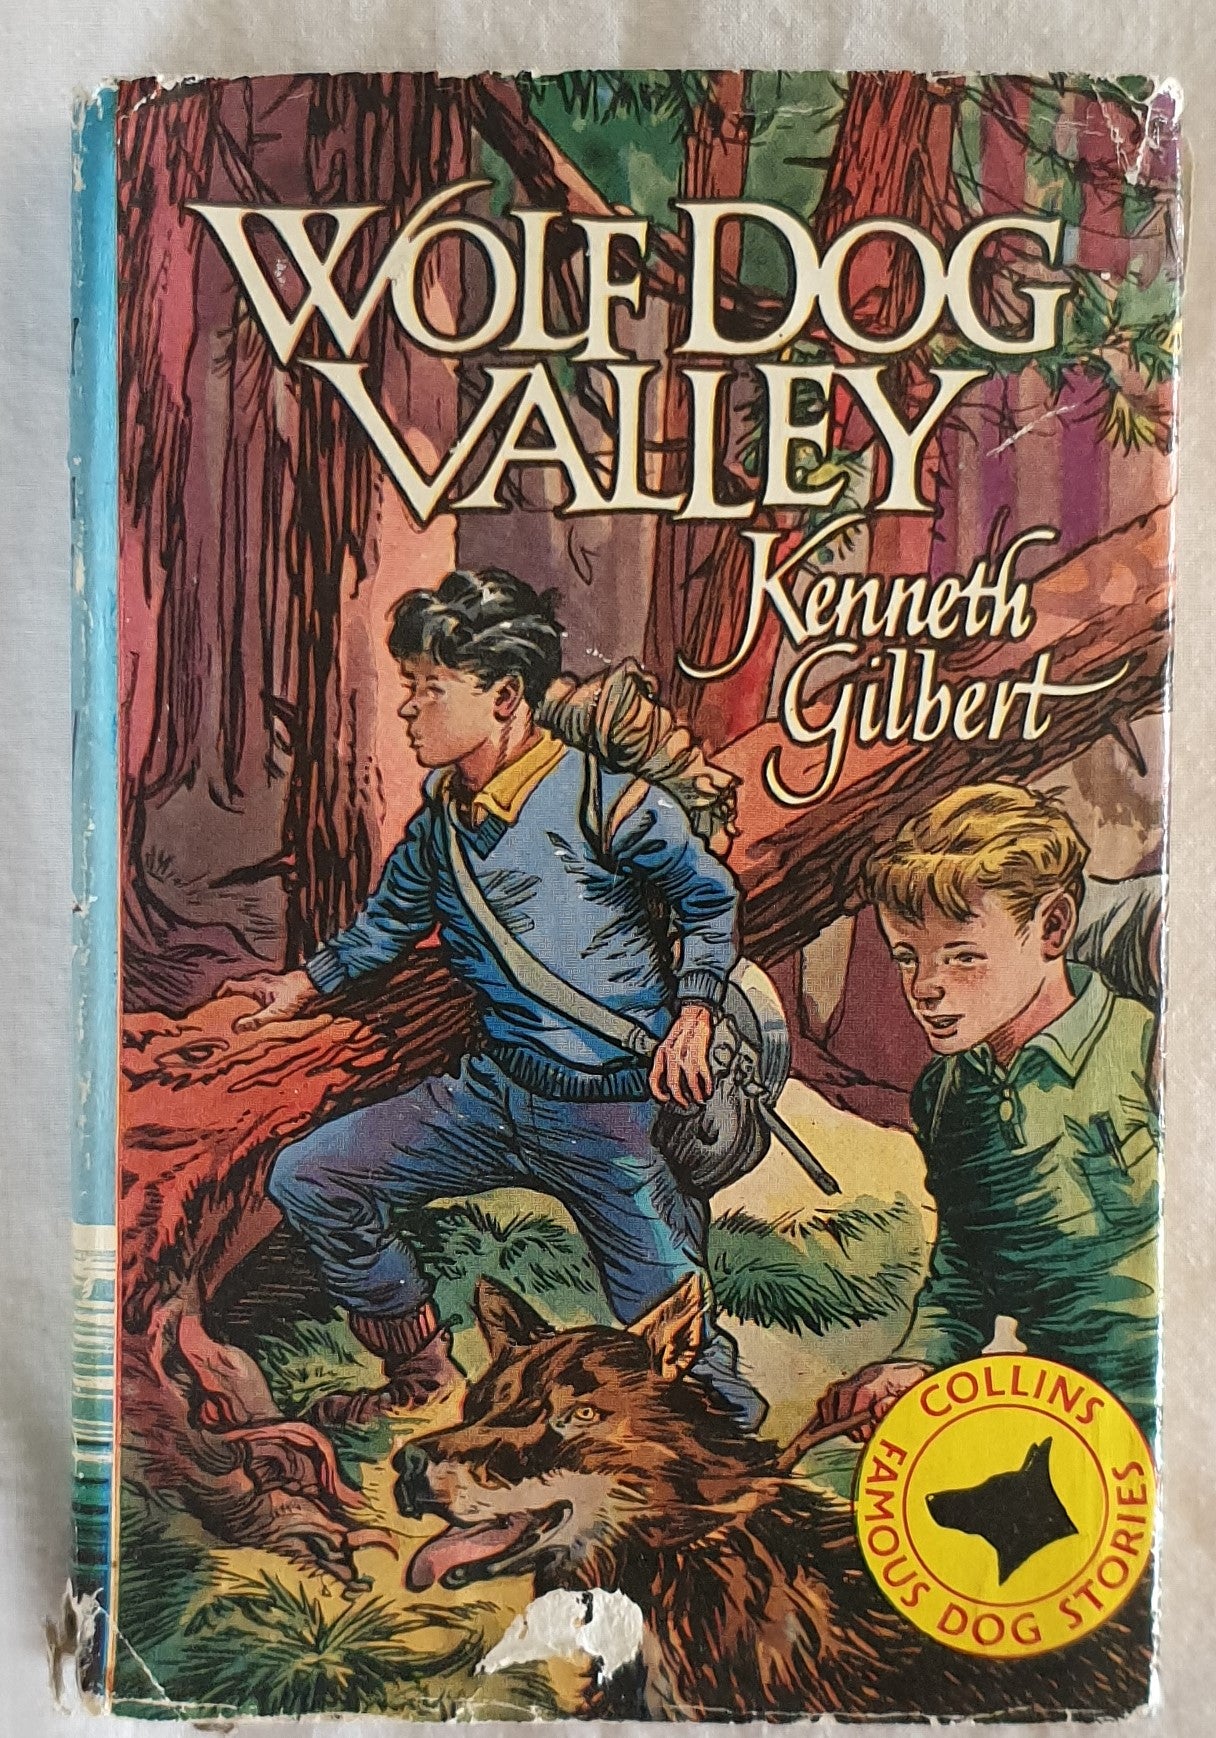 Wolf Dog Valley  by Kenneth Gilbert